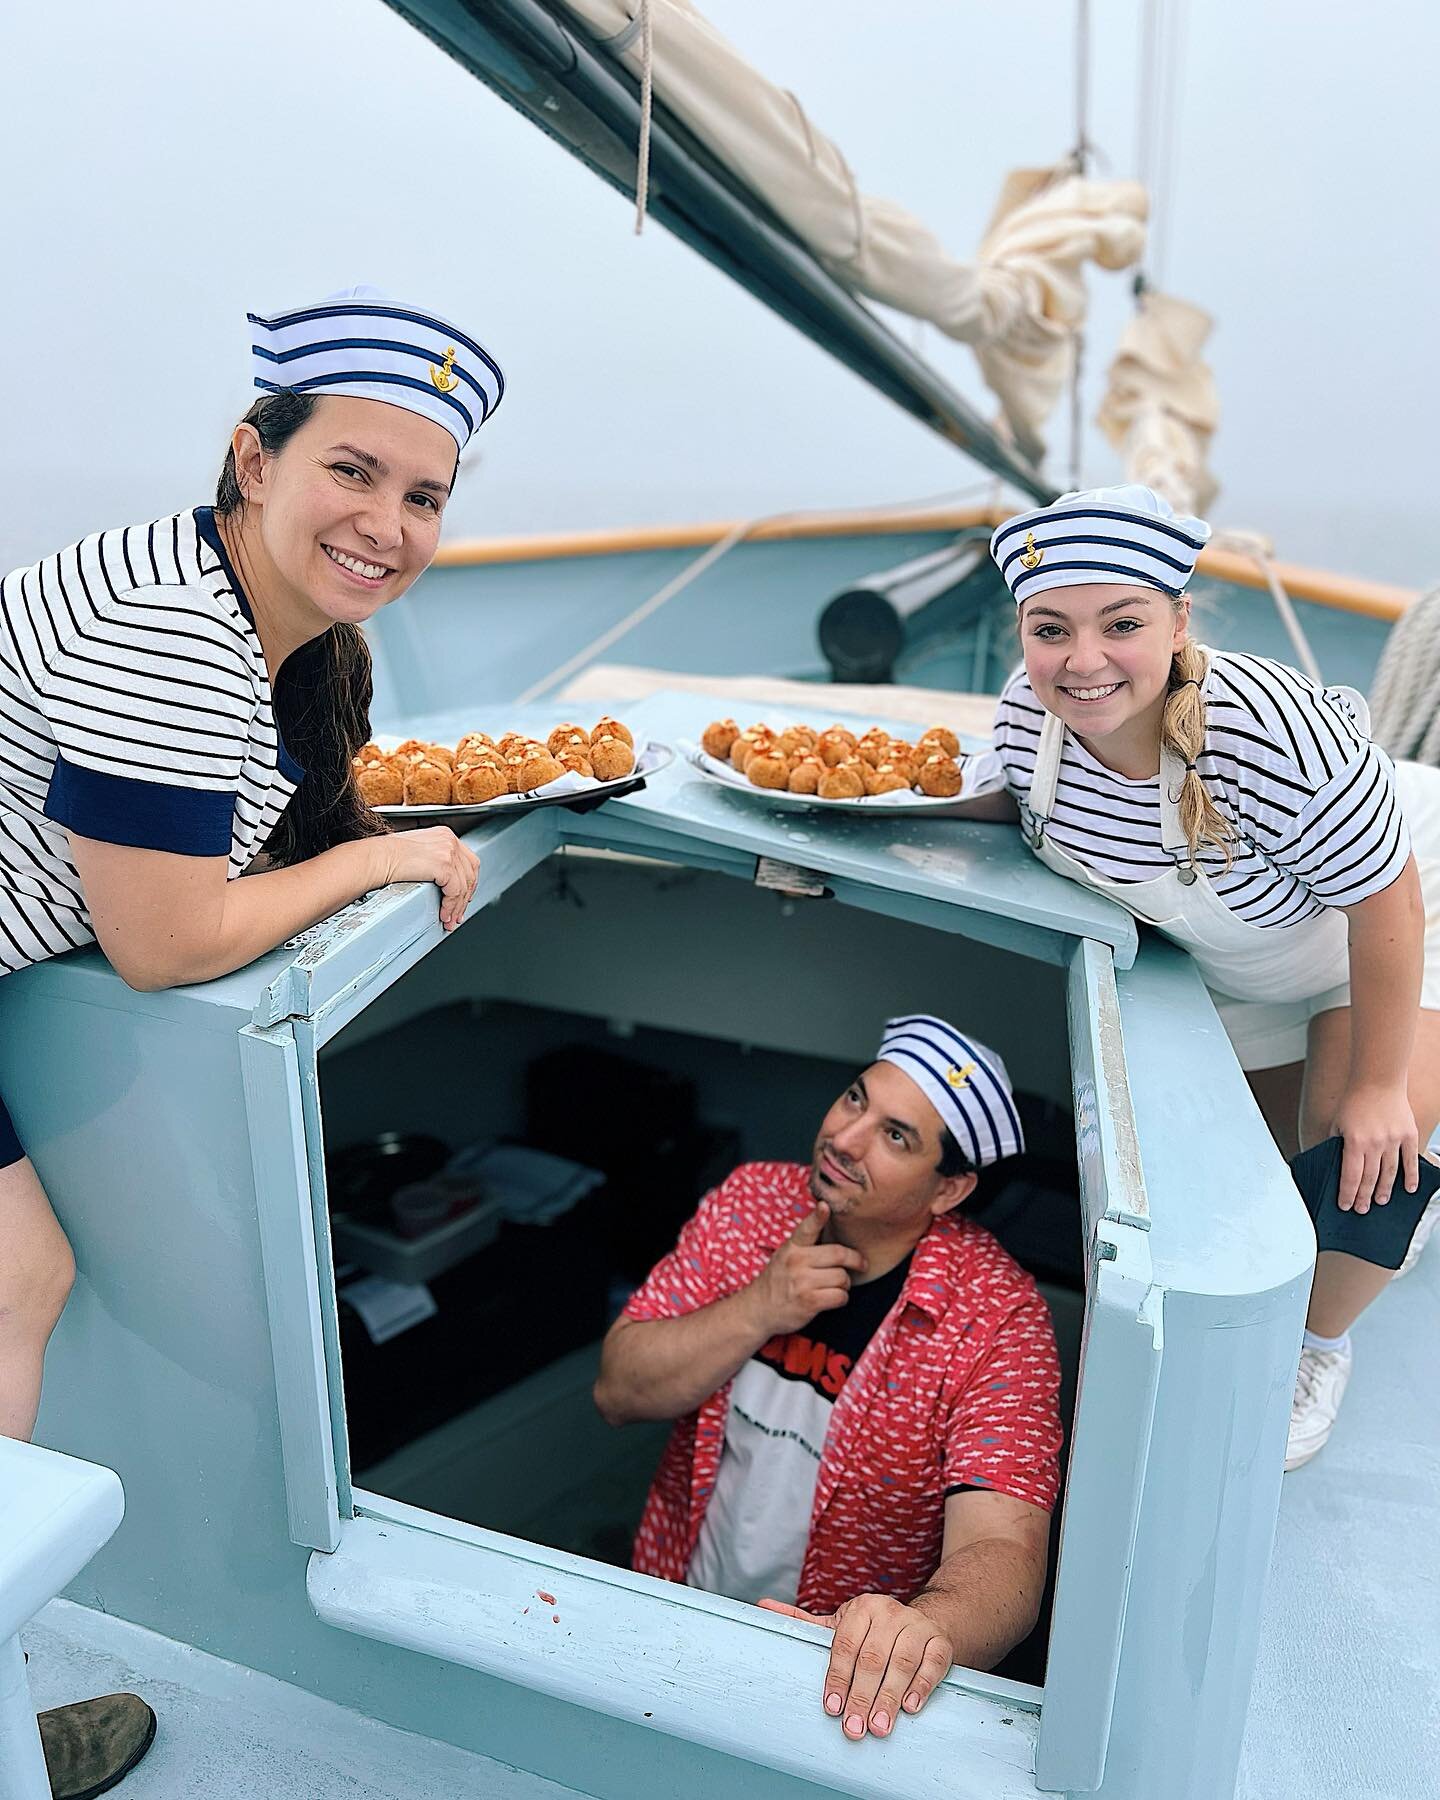 📣 Tickets are now on sale for 2024 Chef Series Wine &amp; Food Sails with Chefs Sansonetti and Ilma Lopez of @chavalmaine and @uglyducklingmaine! We could not be more thrilled to be partnering with these two super-talented James Beard Finalist and N